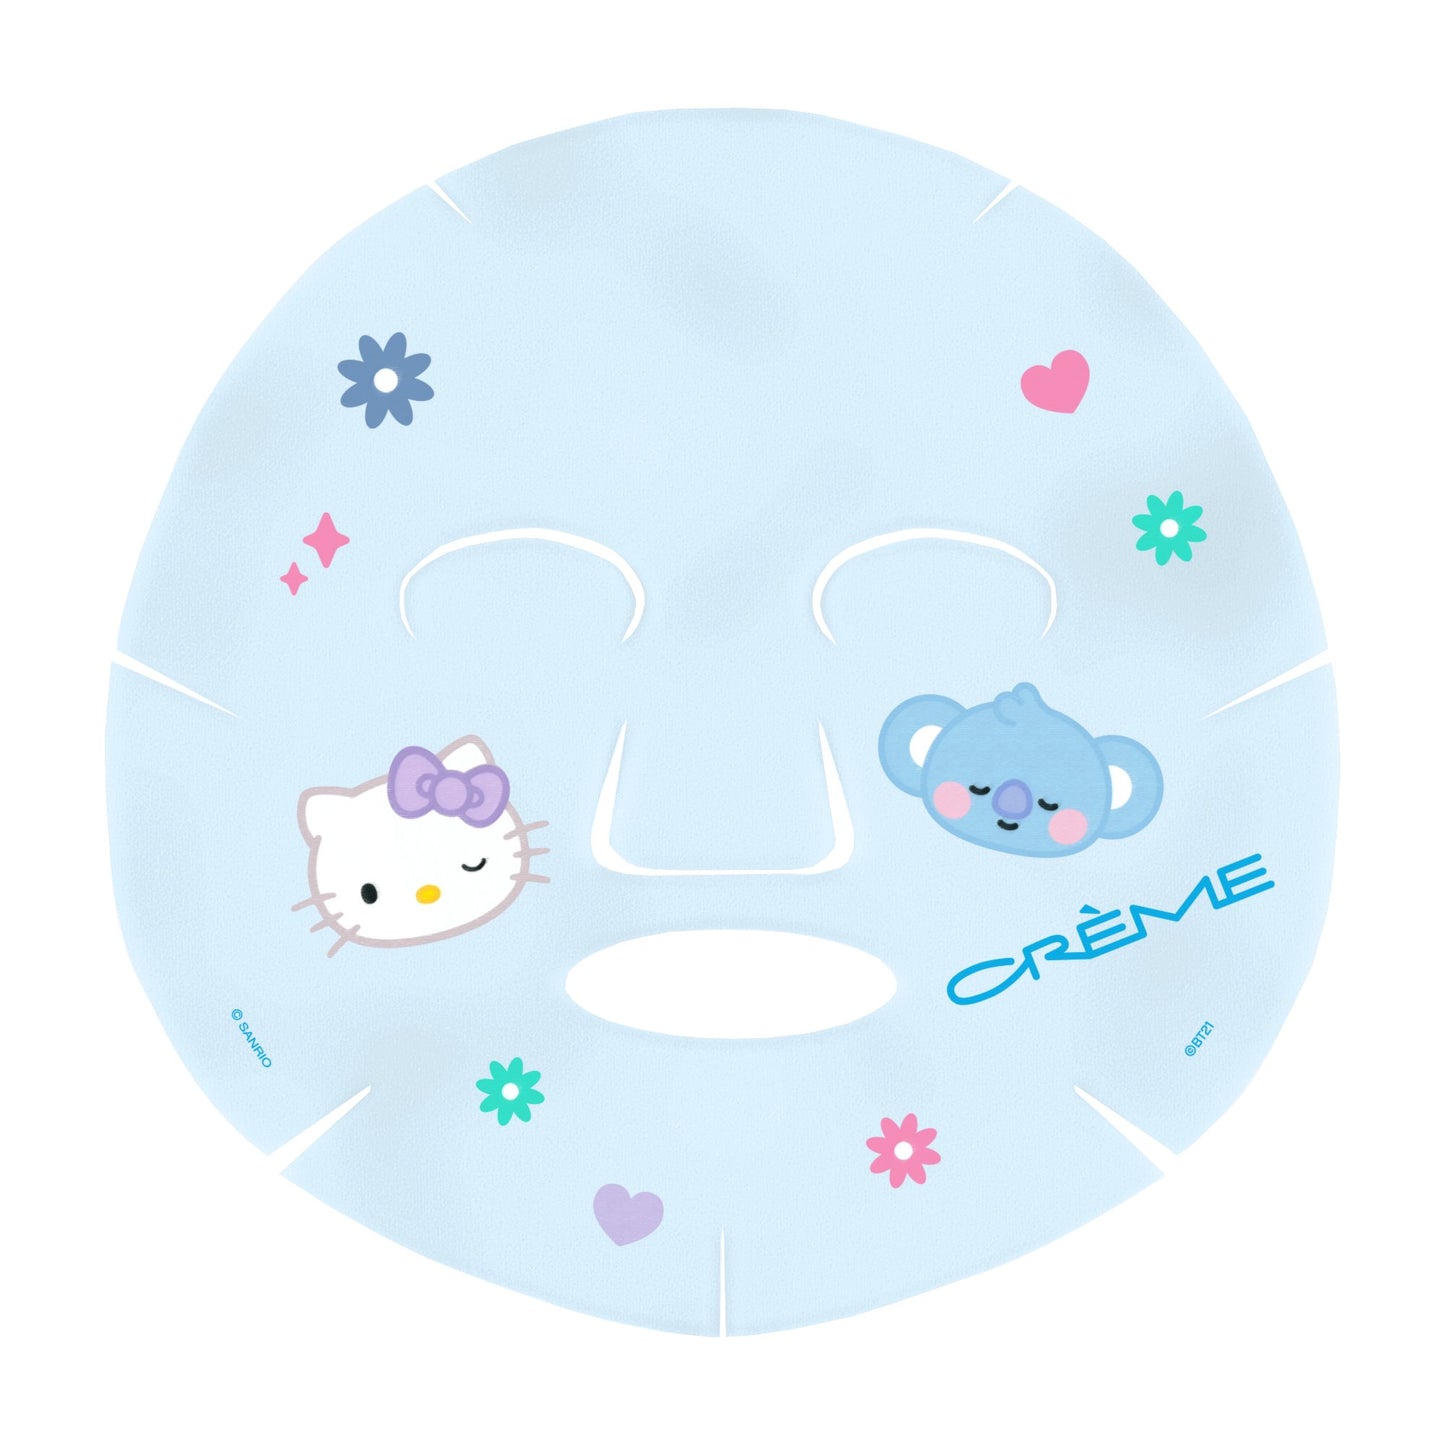 Hello Kitty & BT21 Youthful Glow Printed Essence Sheet Mask Component with Hello Kitty and KOYA